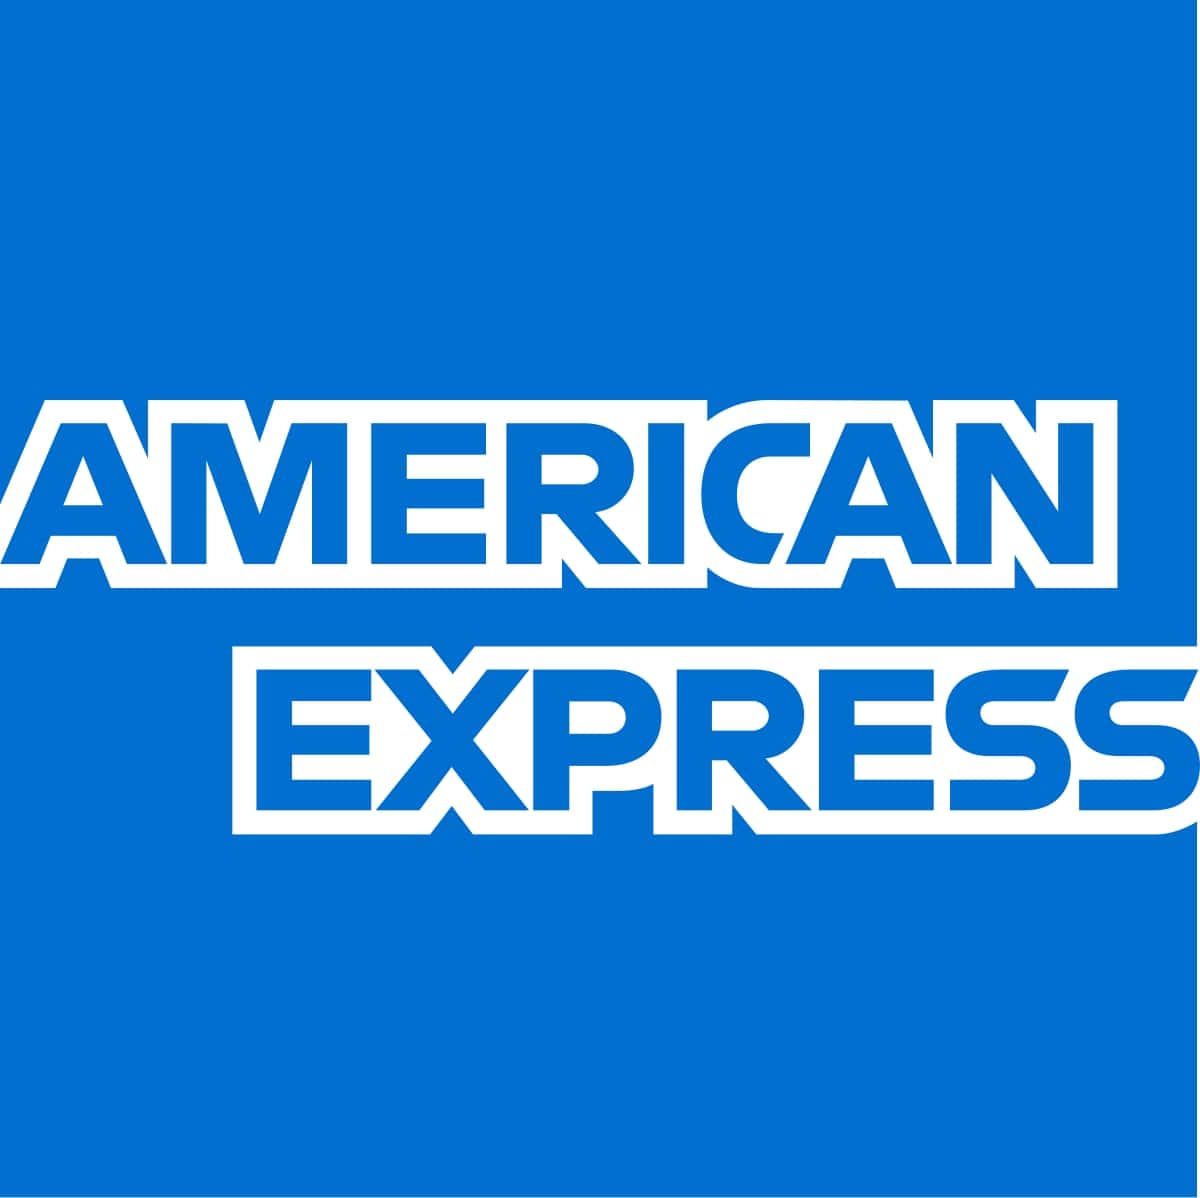 american express travel service